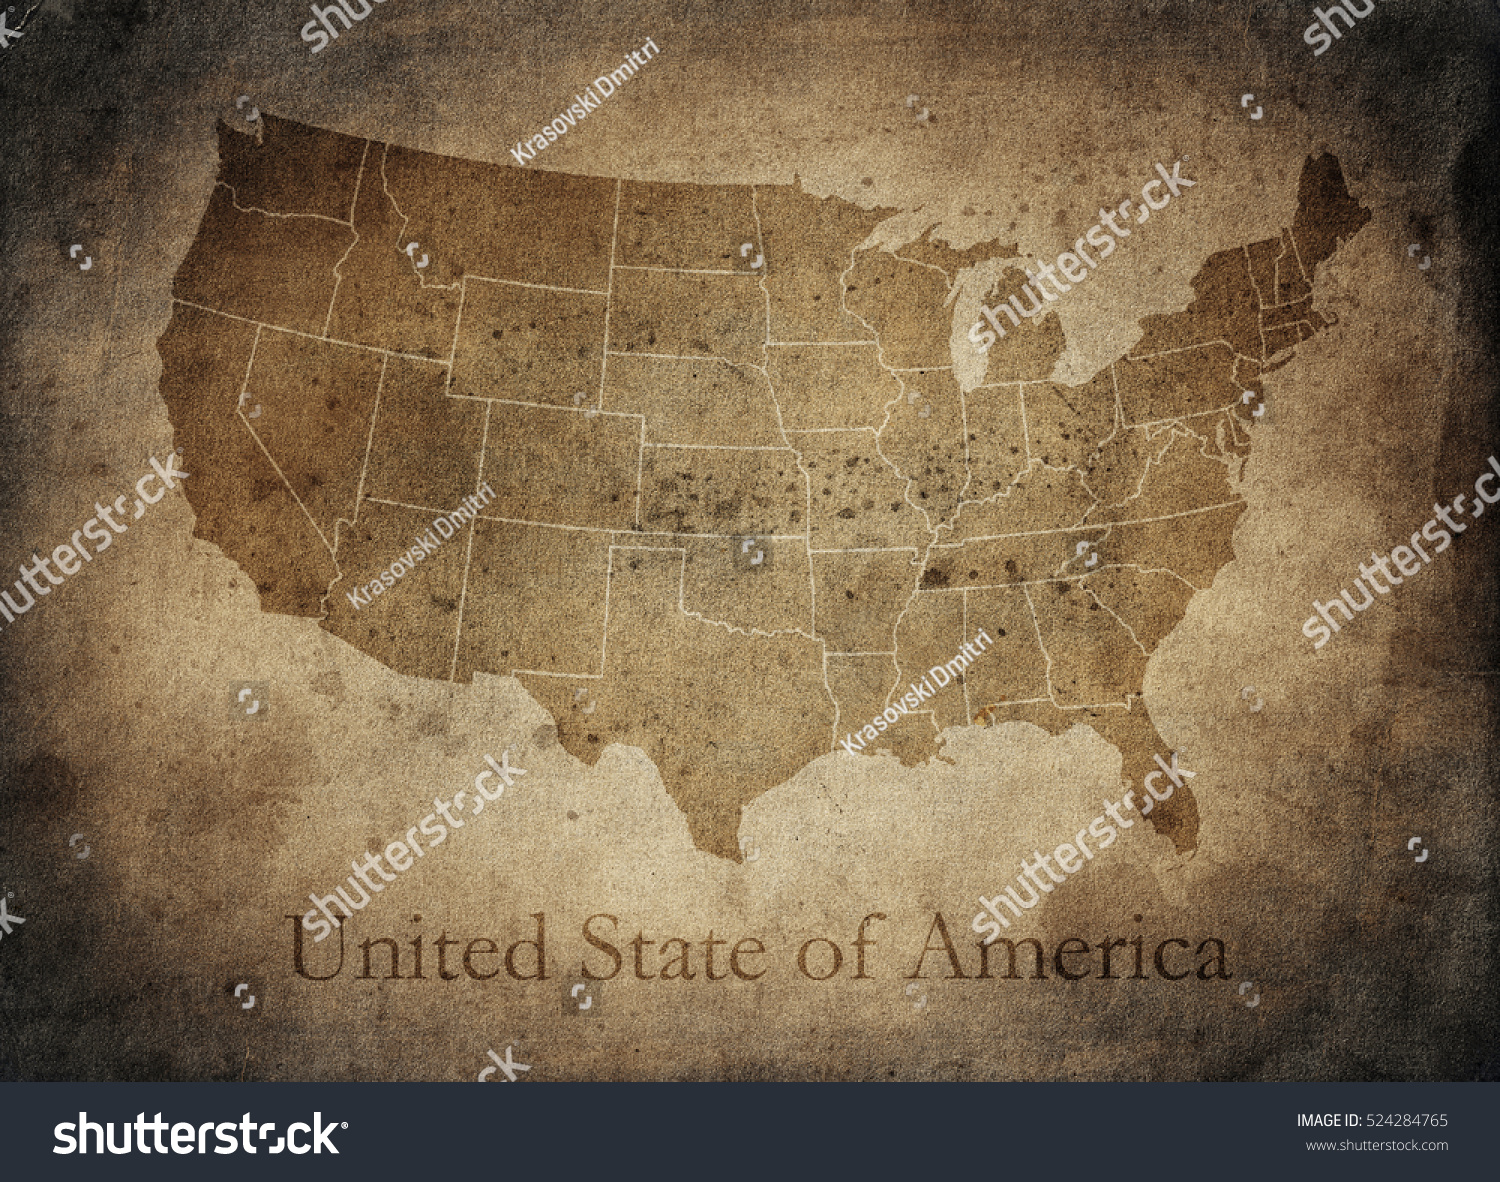 Old Usa map #524284765